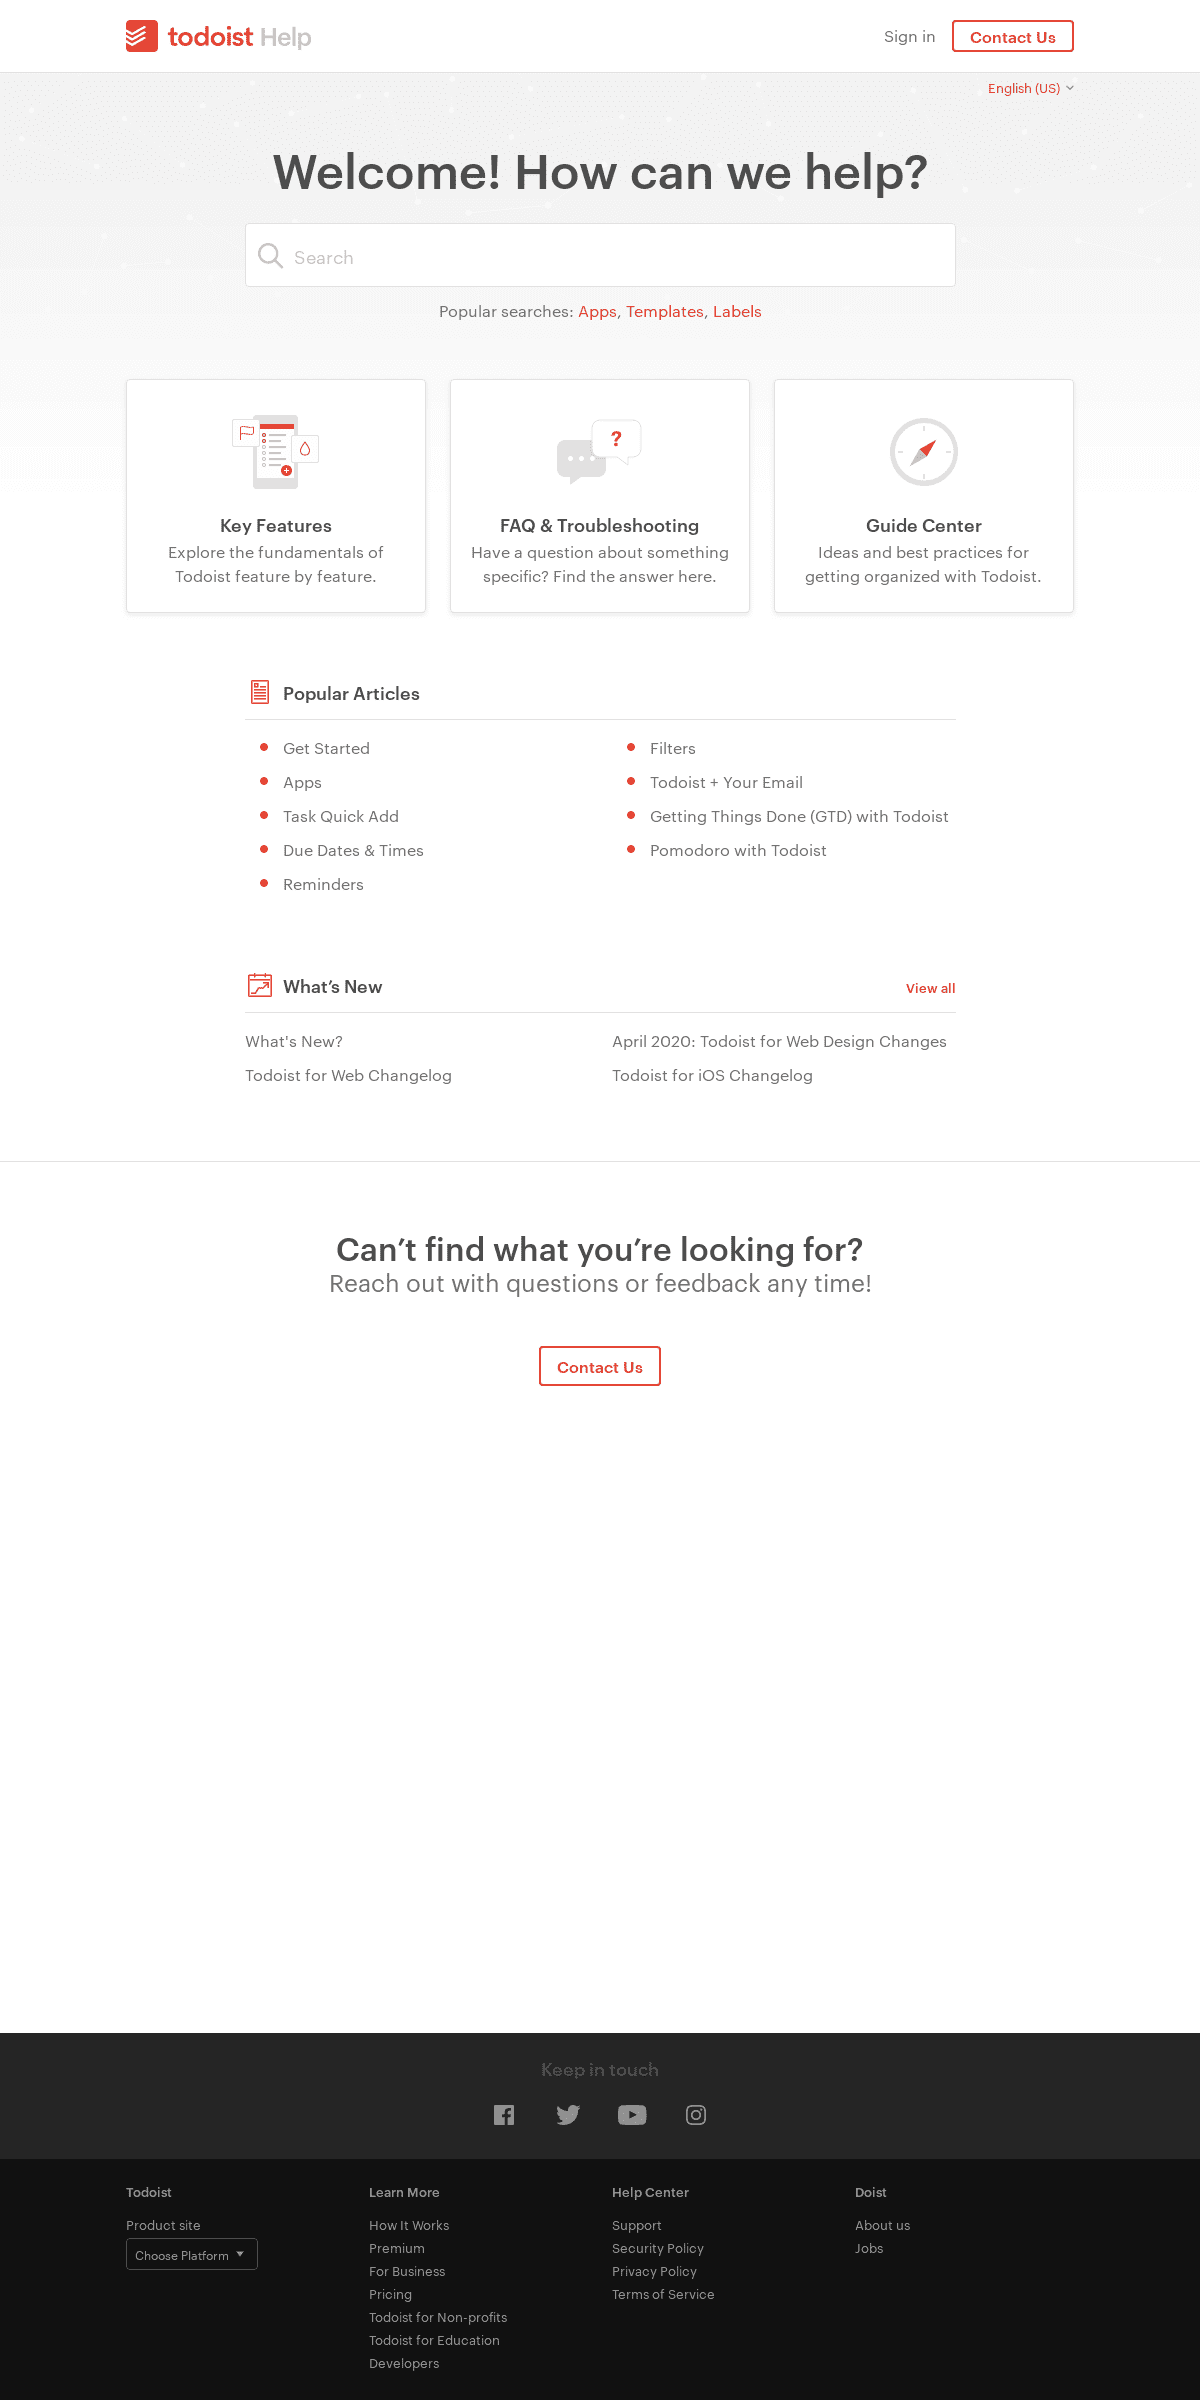 A complete backup of todoist.help